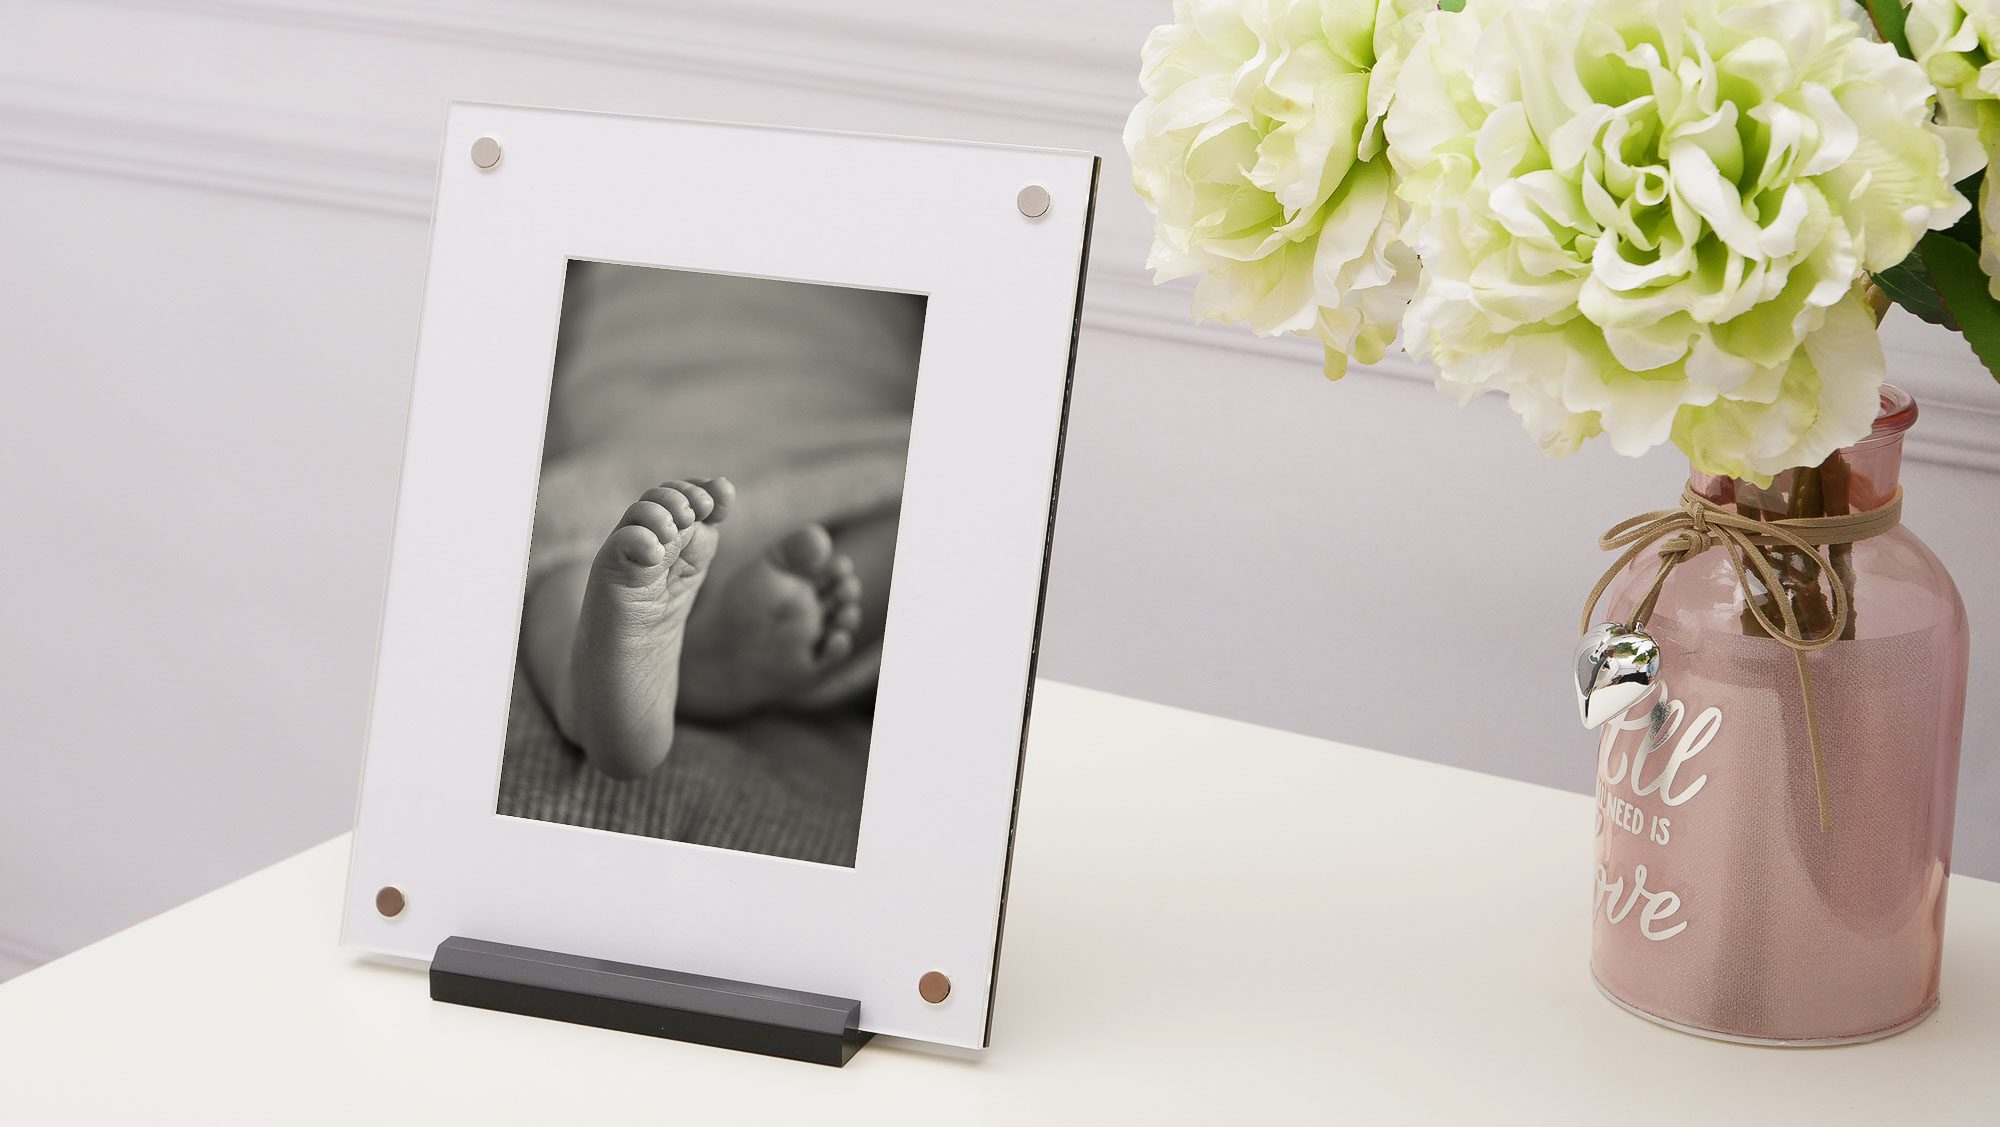 upscale plexi frame for matted print